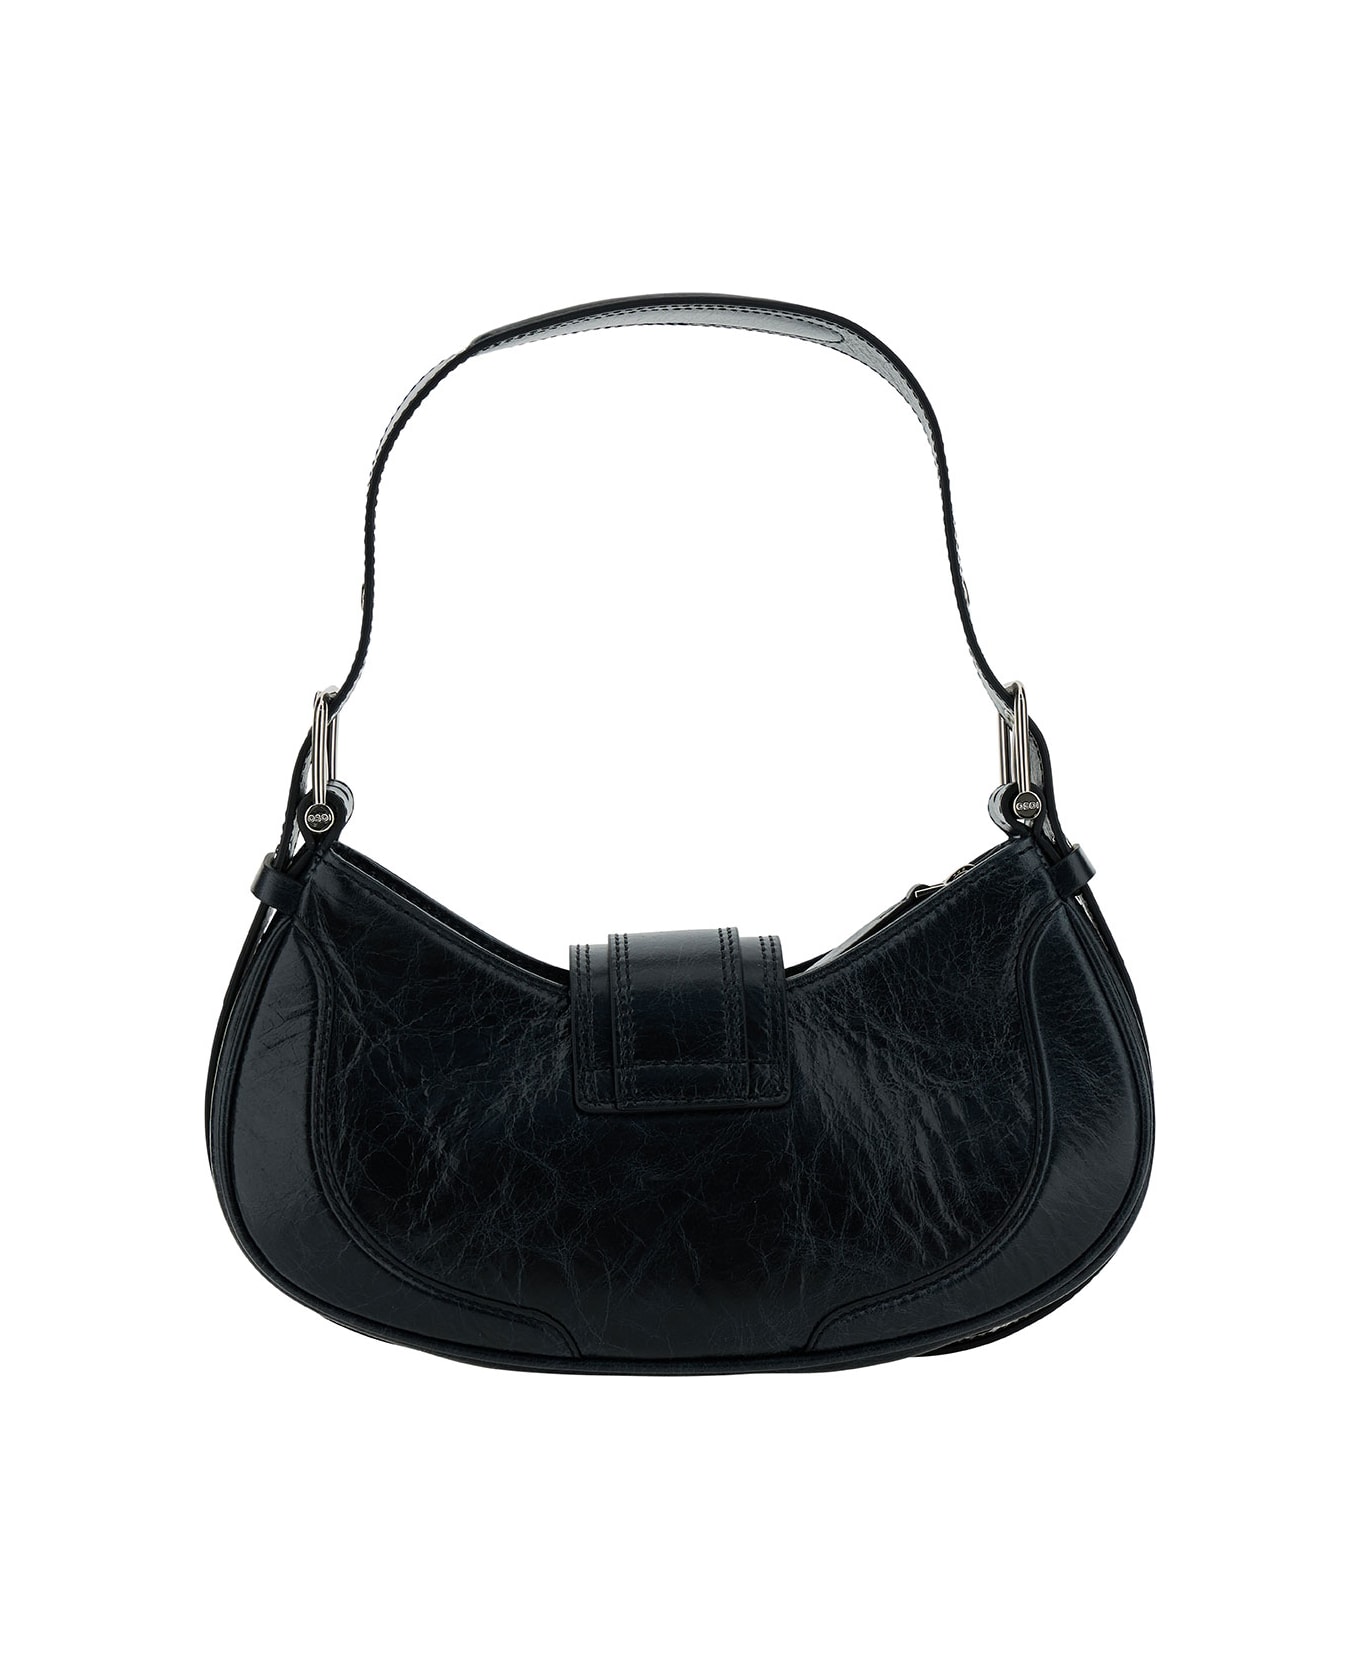 OSOI 'small Brocle' Black Shoulder Bag In Hammered Leather Woman - Black